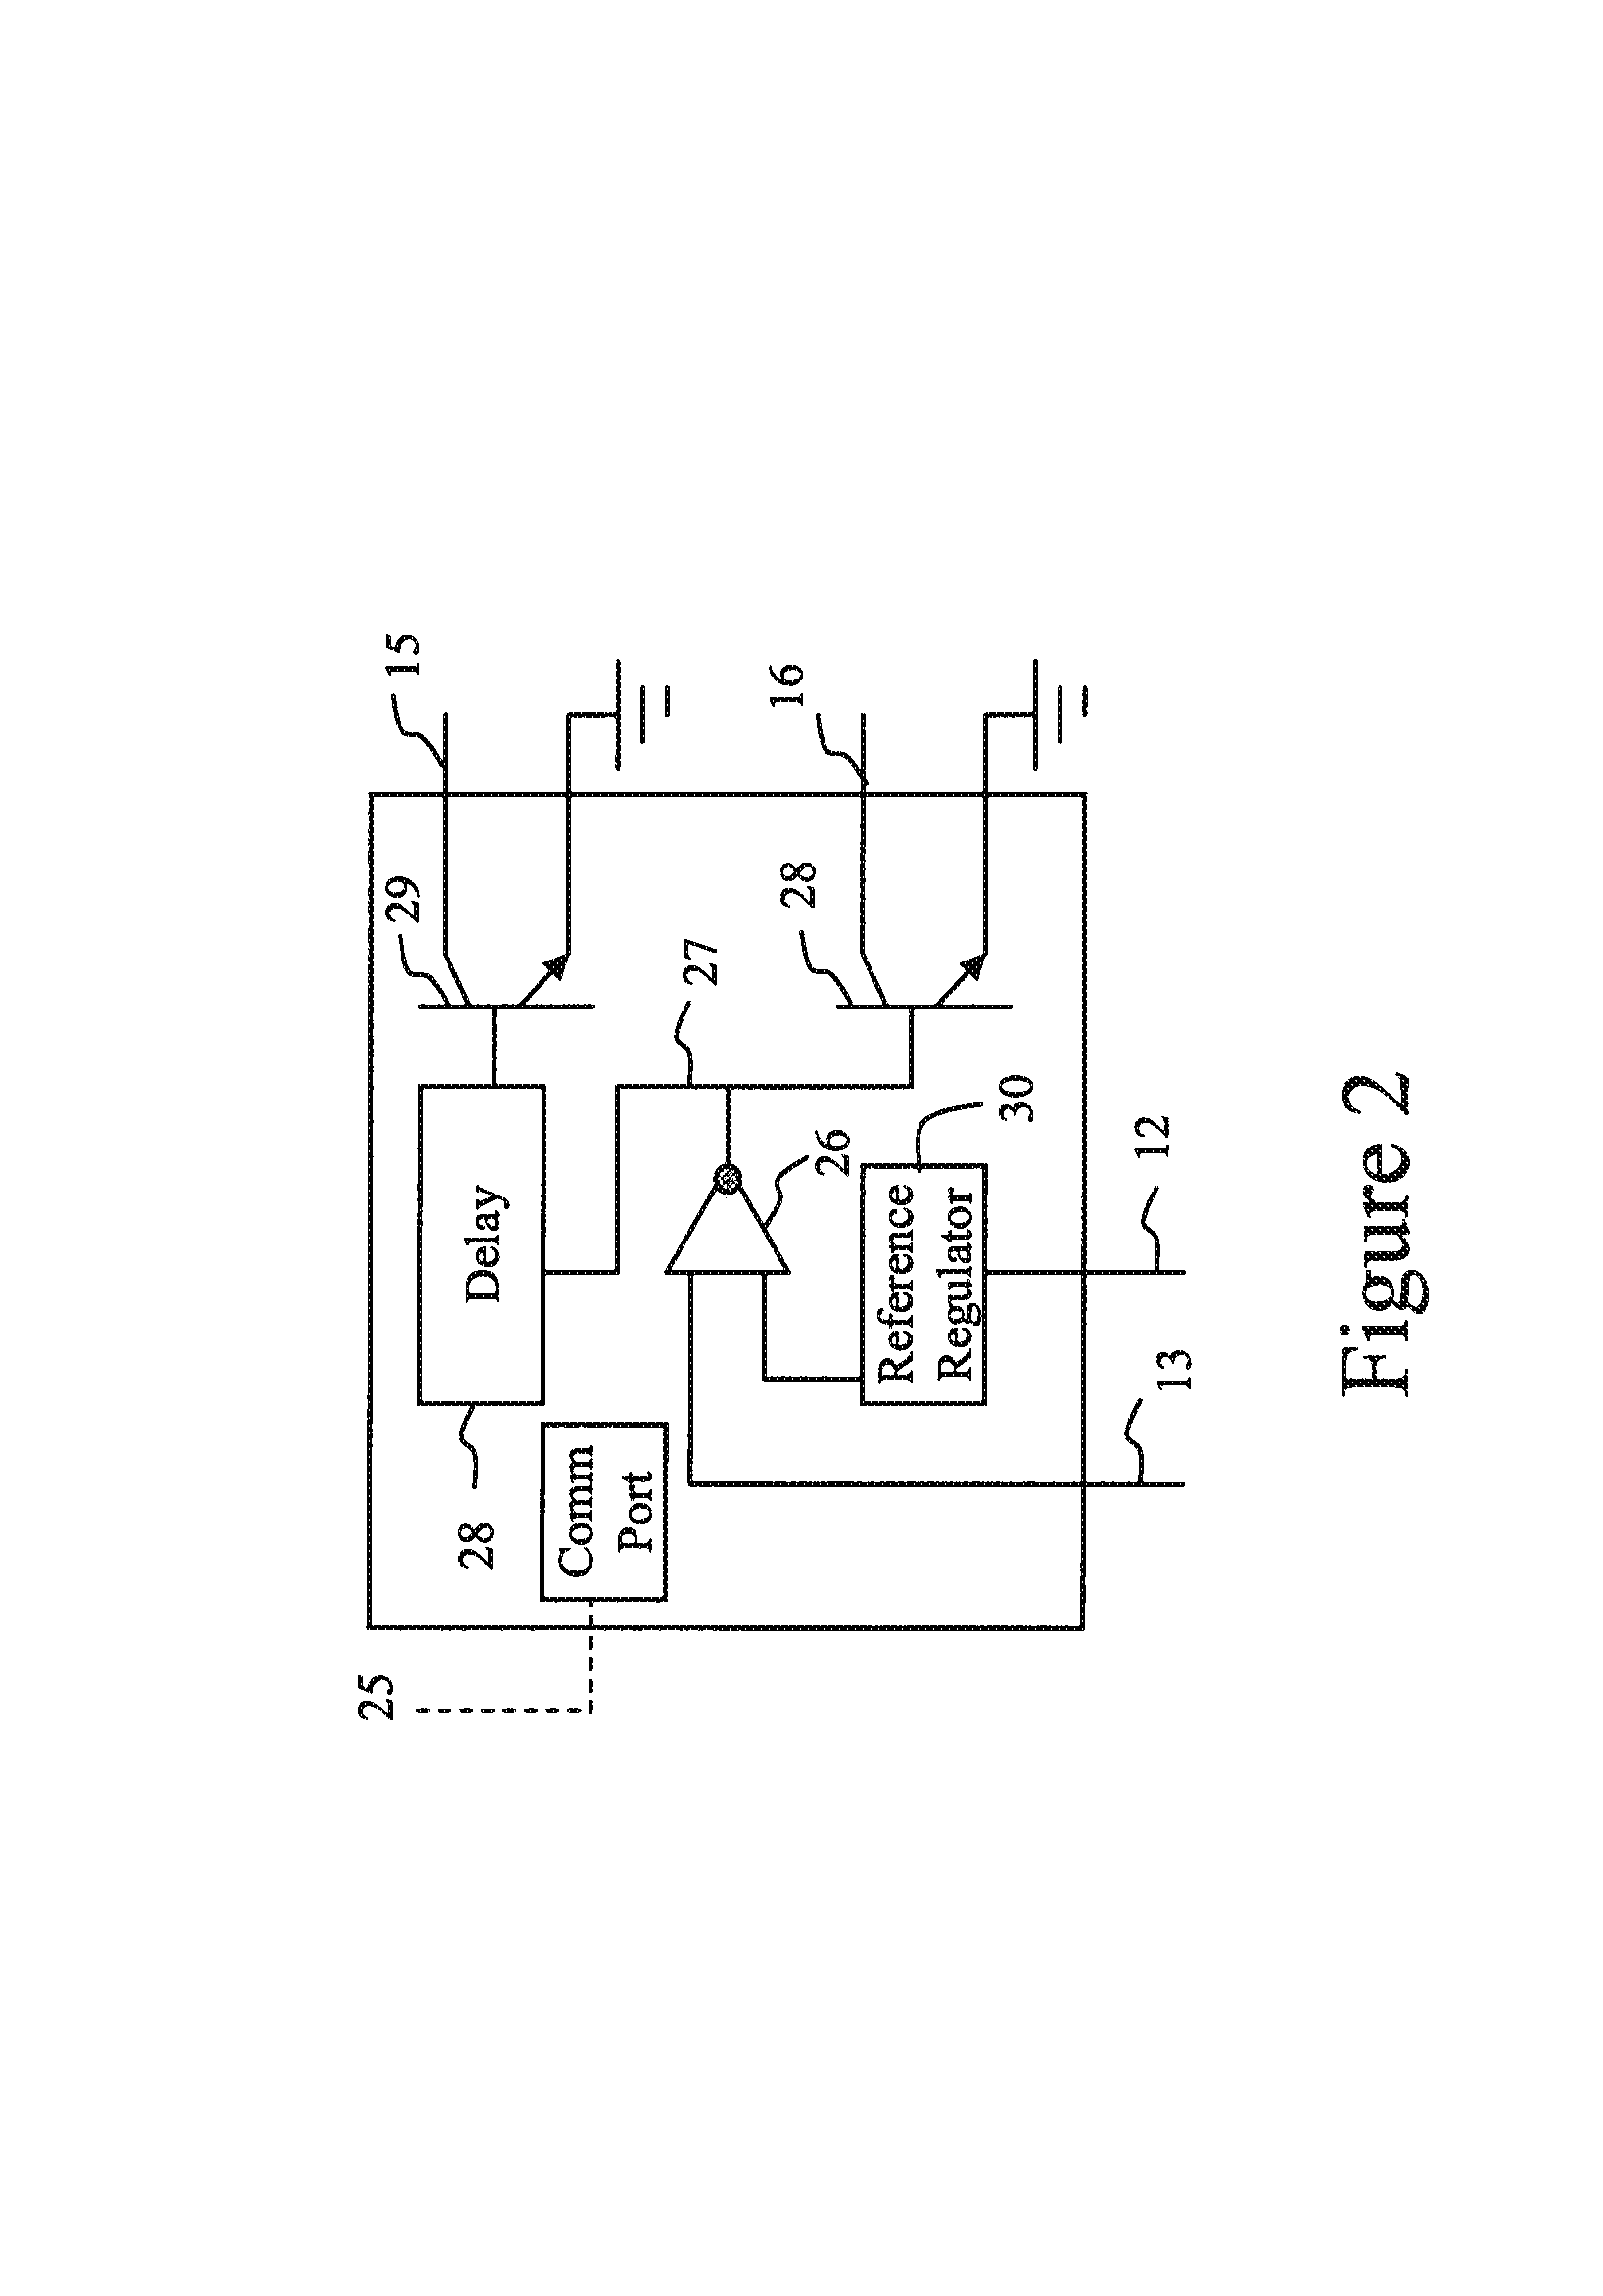 Method and apparatus to maximize stored energy in UltraCapacitor Systems